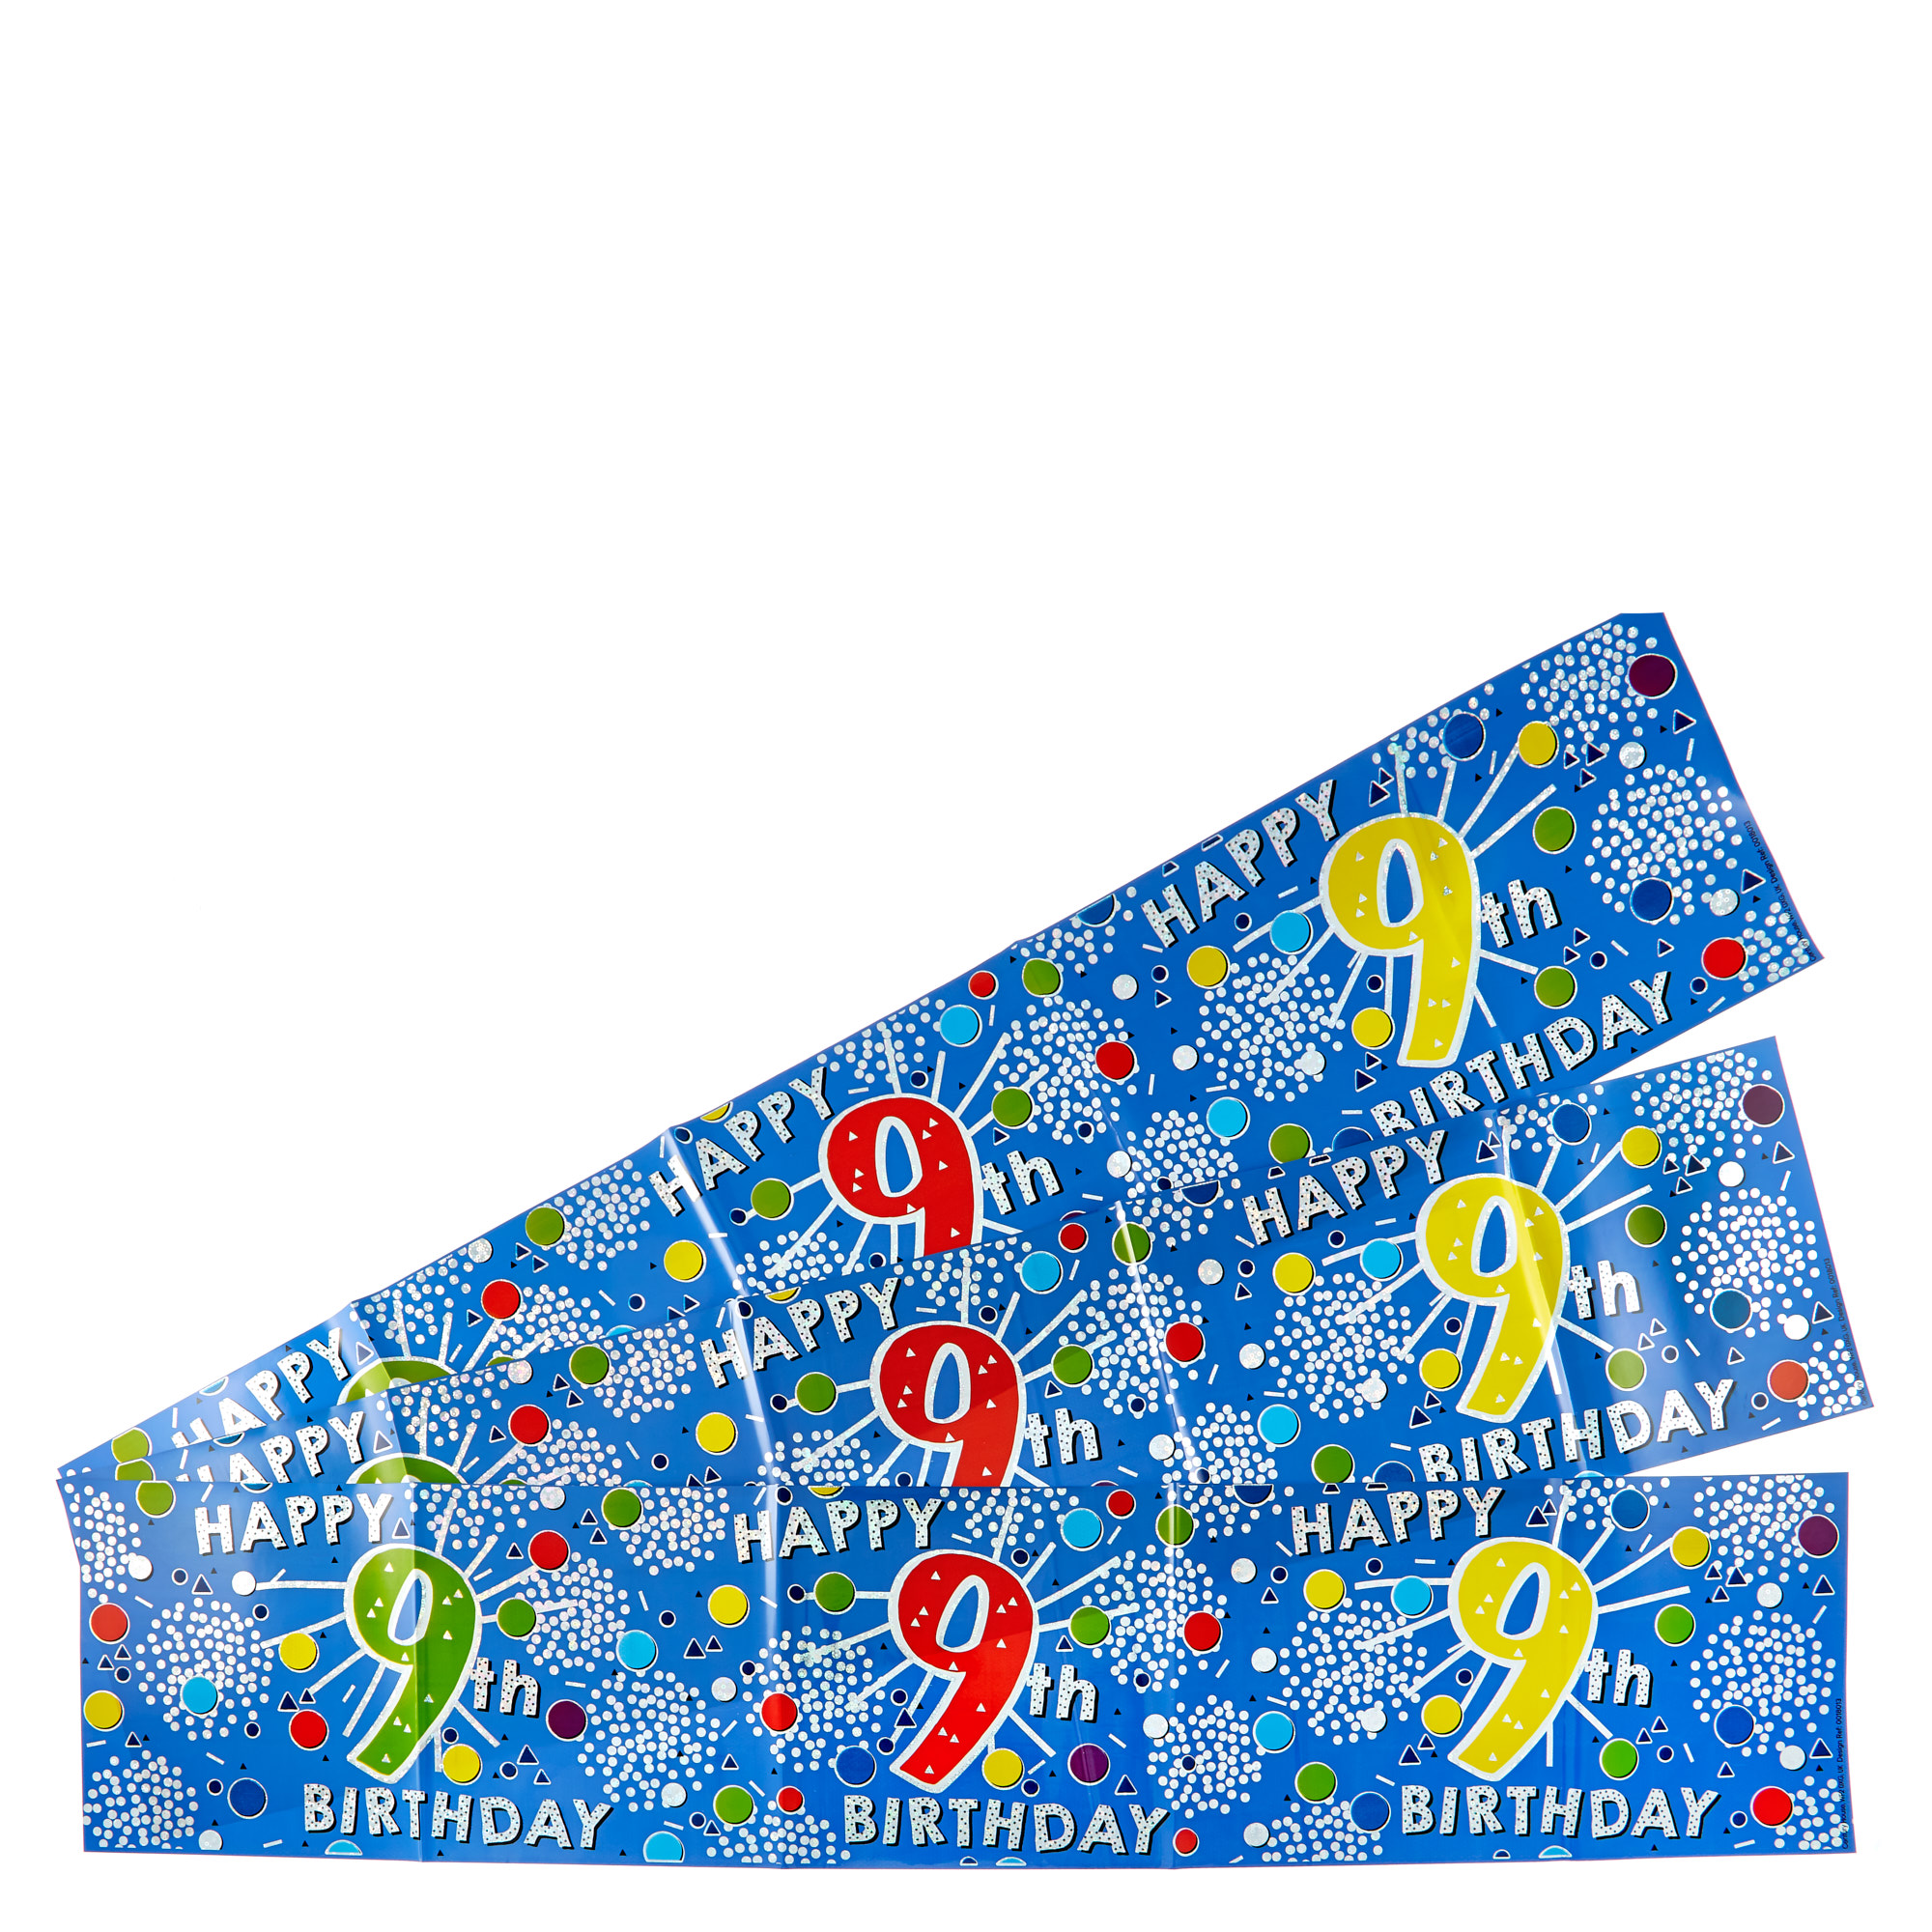 Holographic 9th Birthday Party Banners - Pack Of 3 